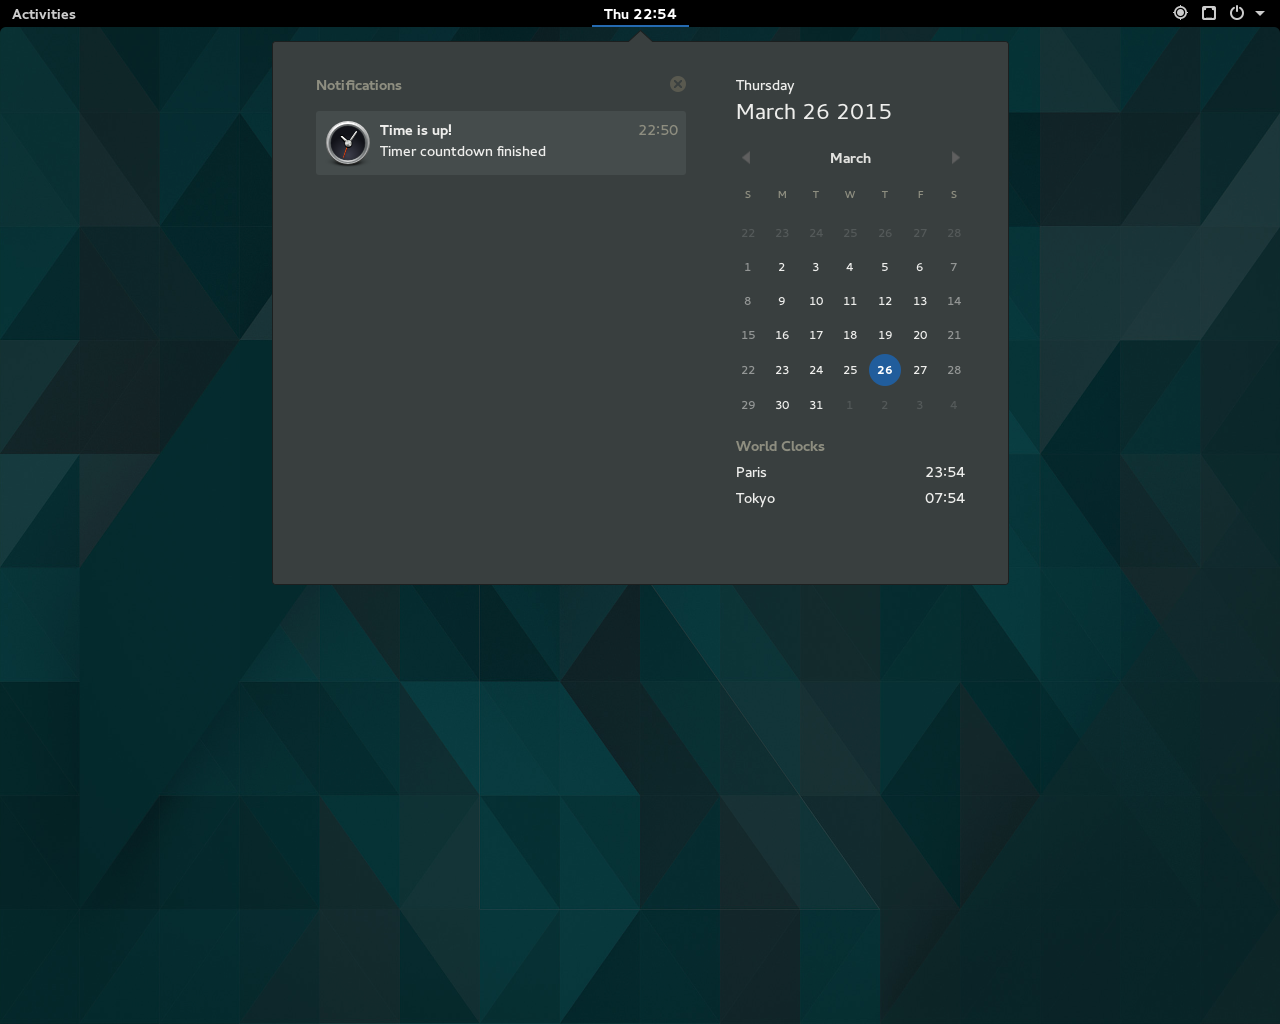 GNOME 3.16 is here with reimagined notifications and visual upgrades